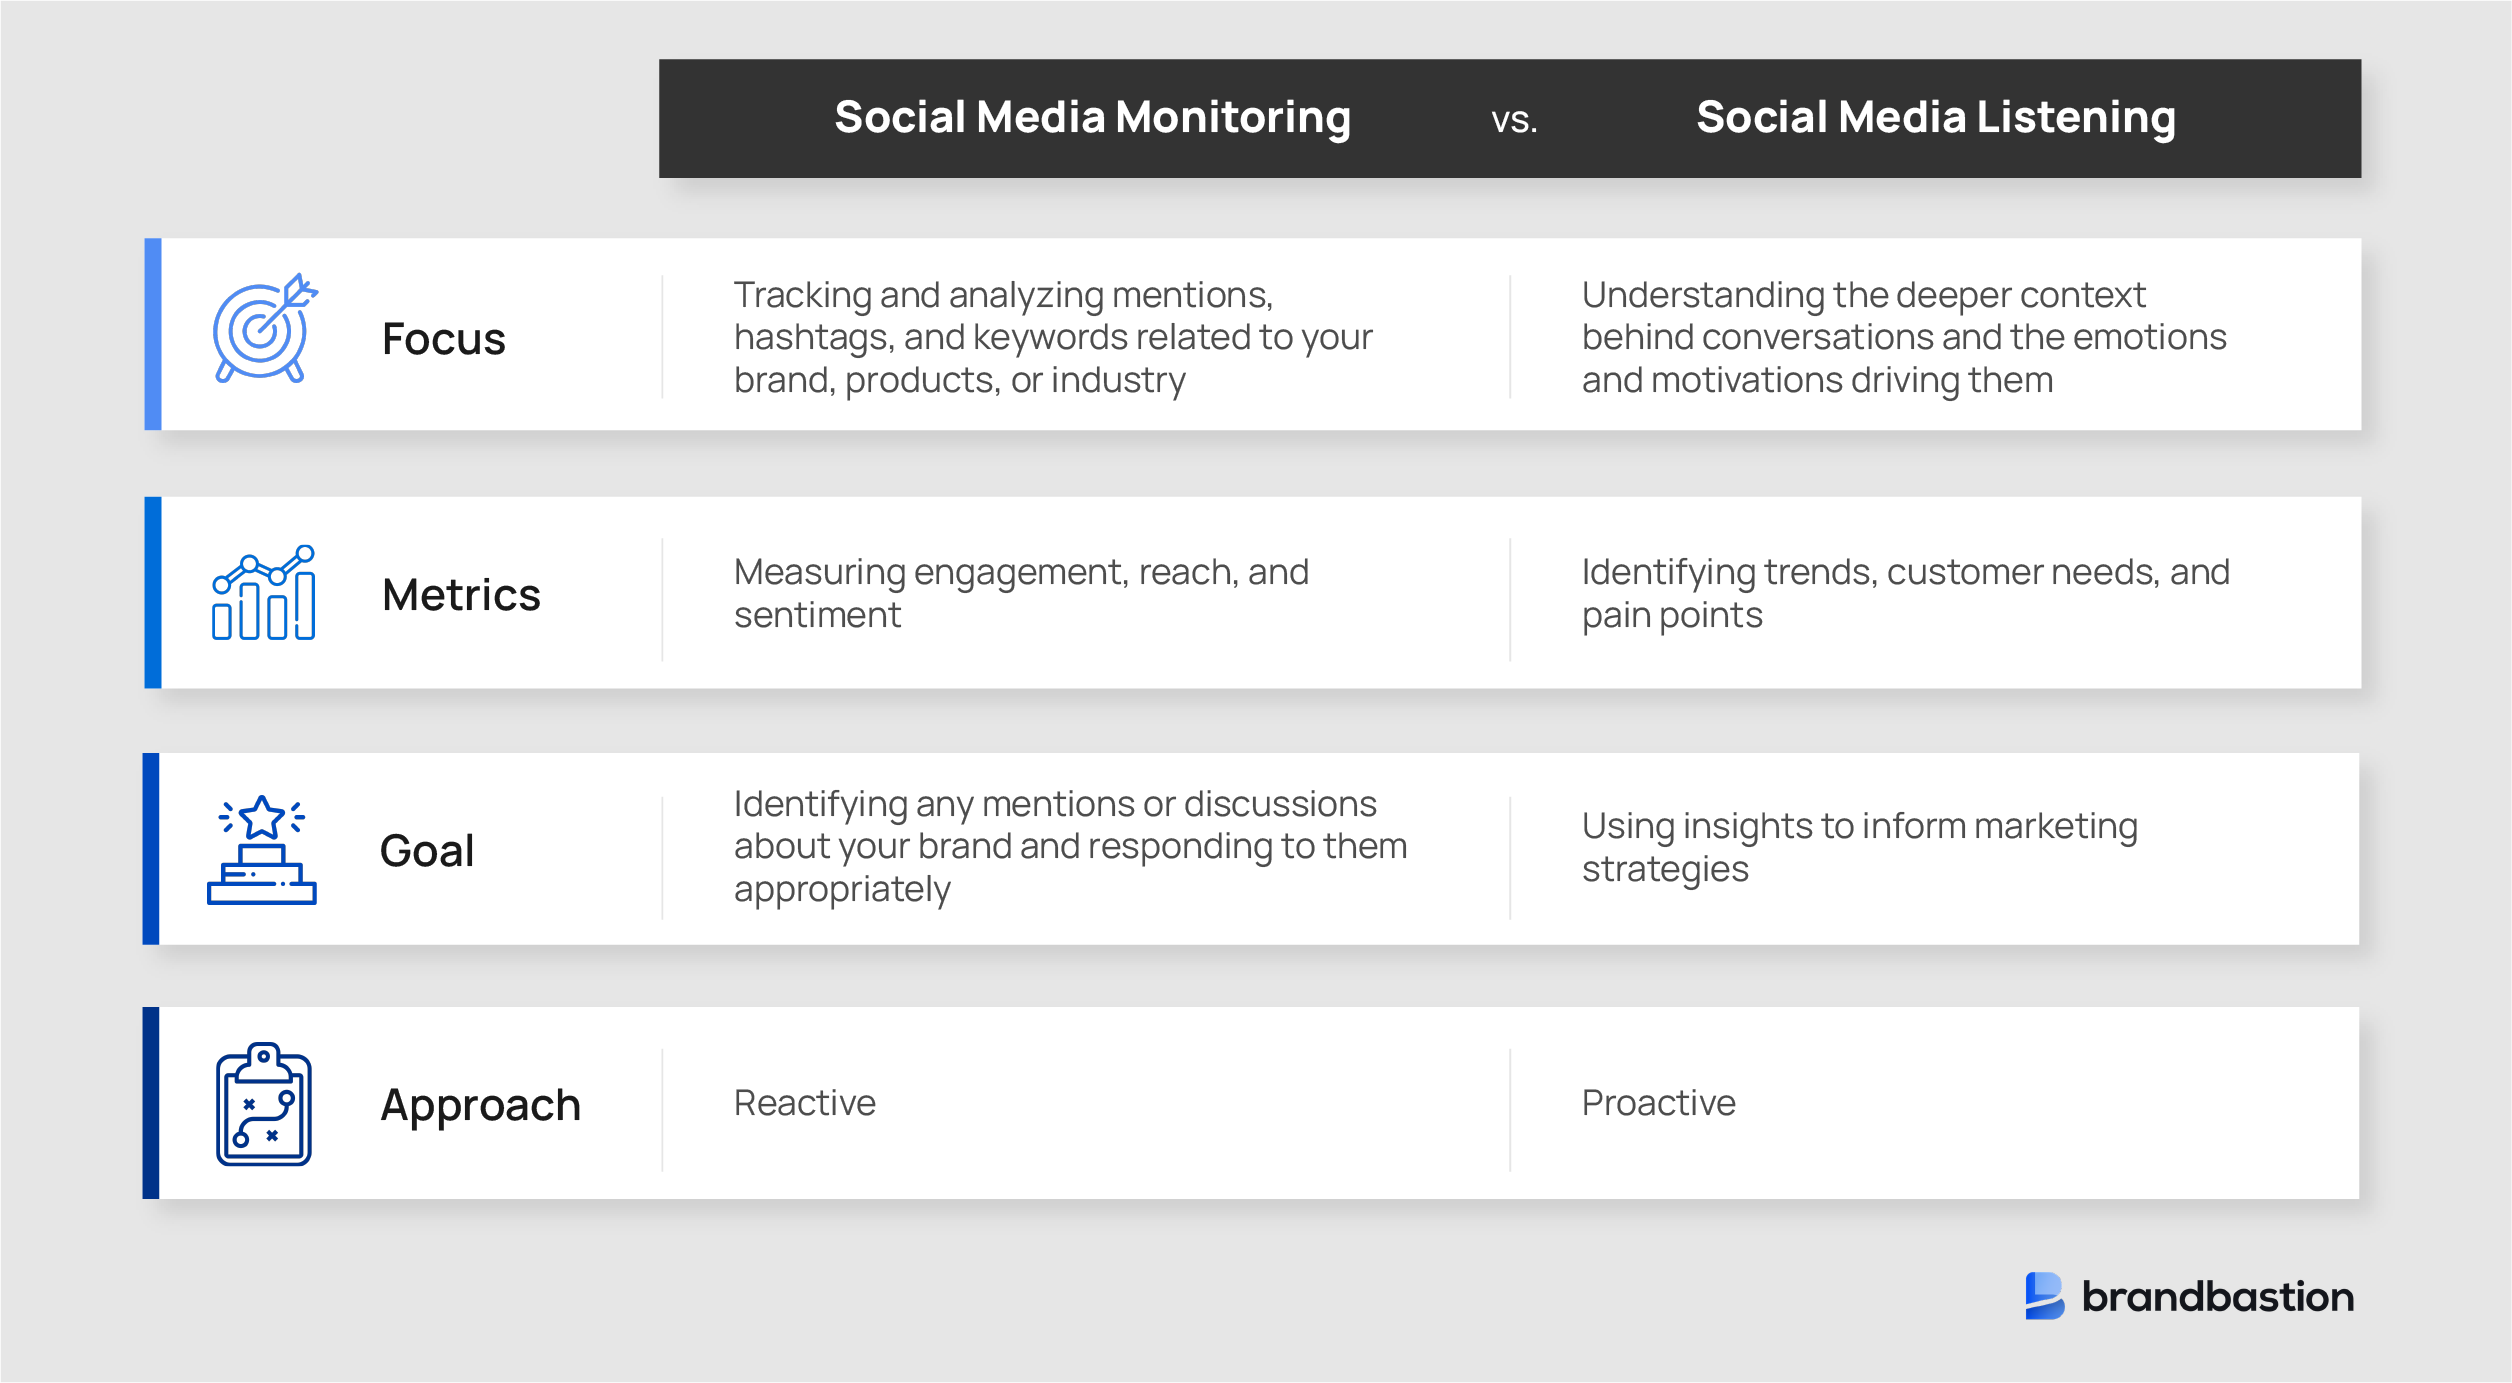 Differences between social media monitoring and listening